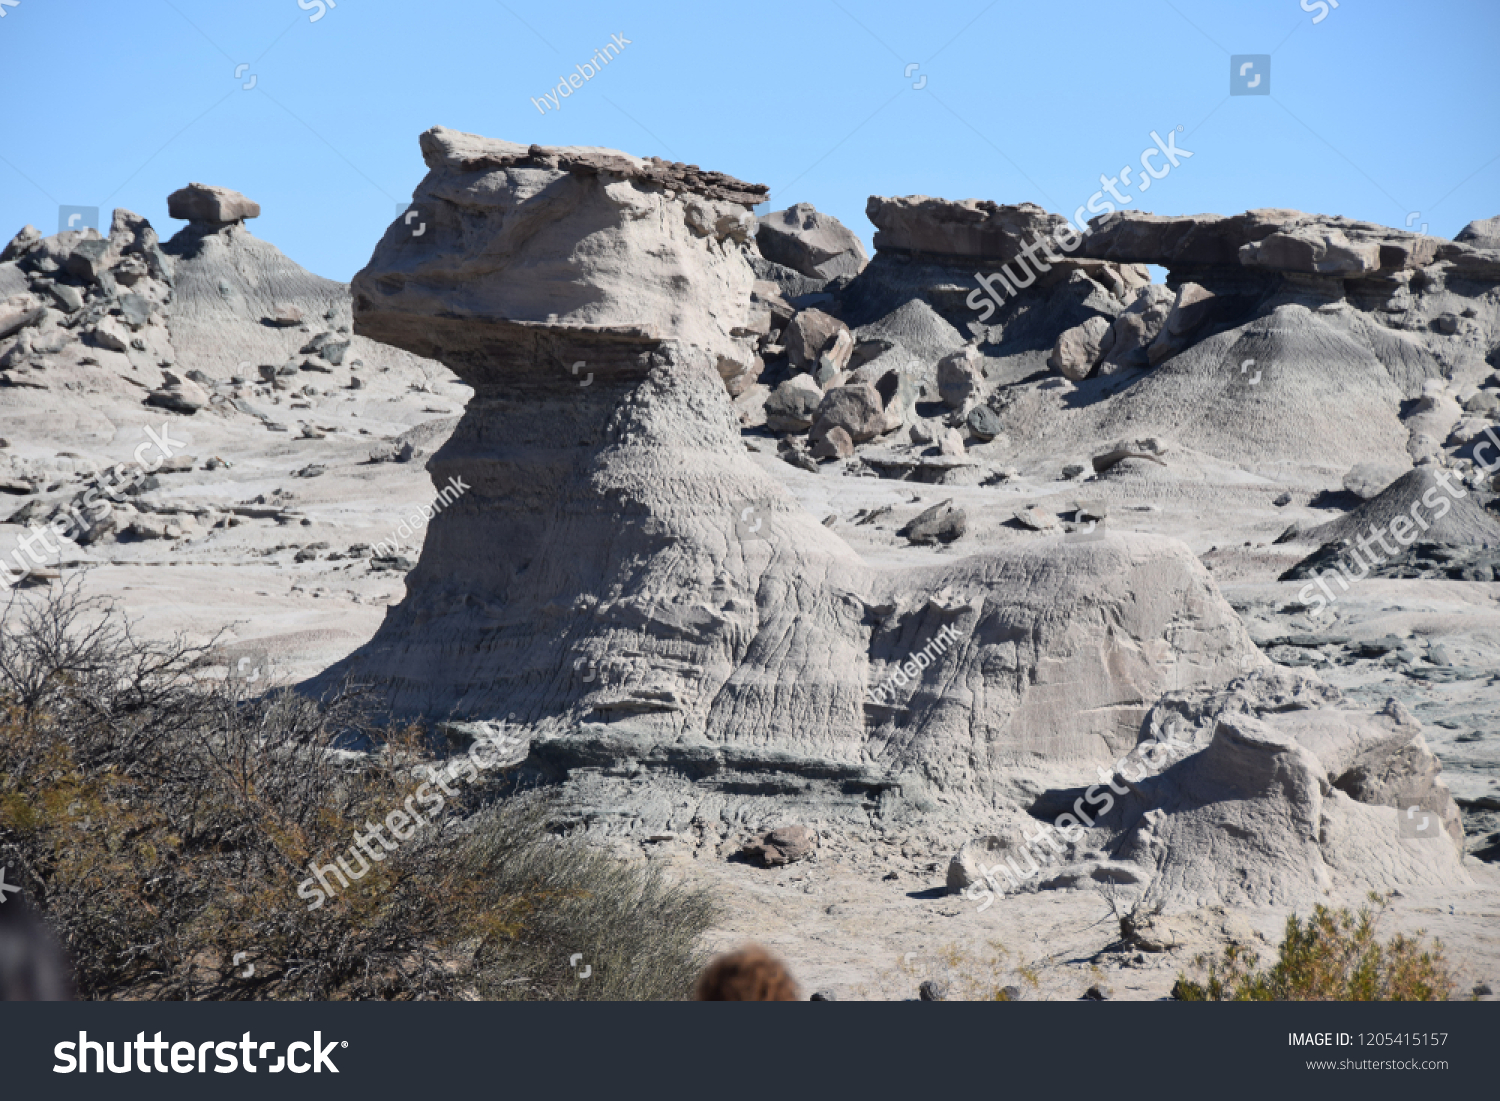 Geological formation in the Ischigualasto nature park in the form of a sphynx #1205415157